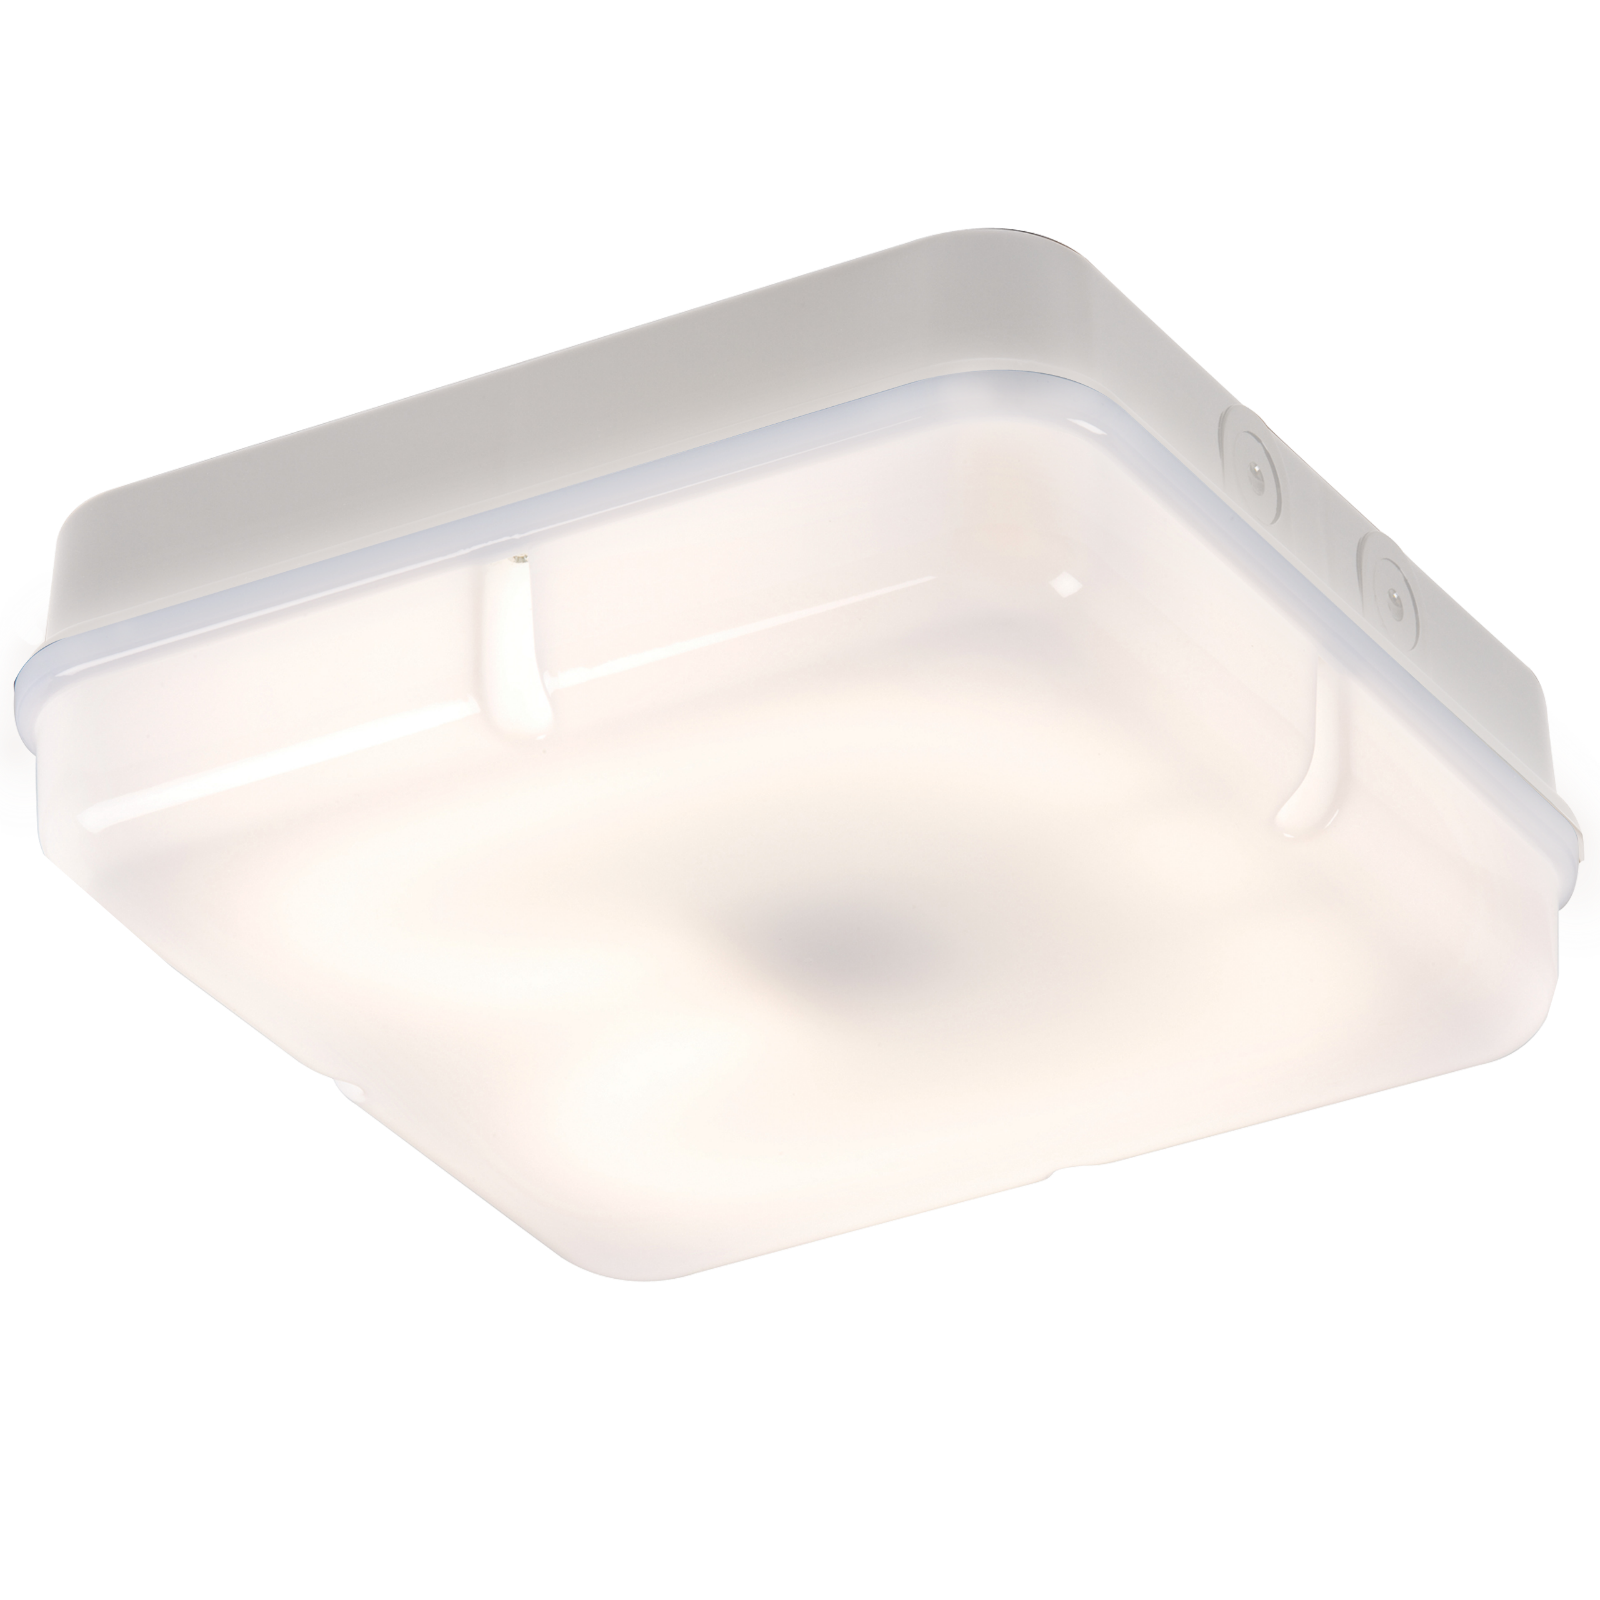 IP65 28W HF Square Emergency Bulkhead With Opal Diffuser And White Base - TPS28WOEMHF 